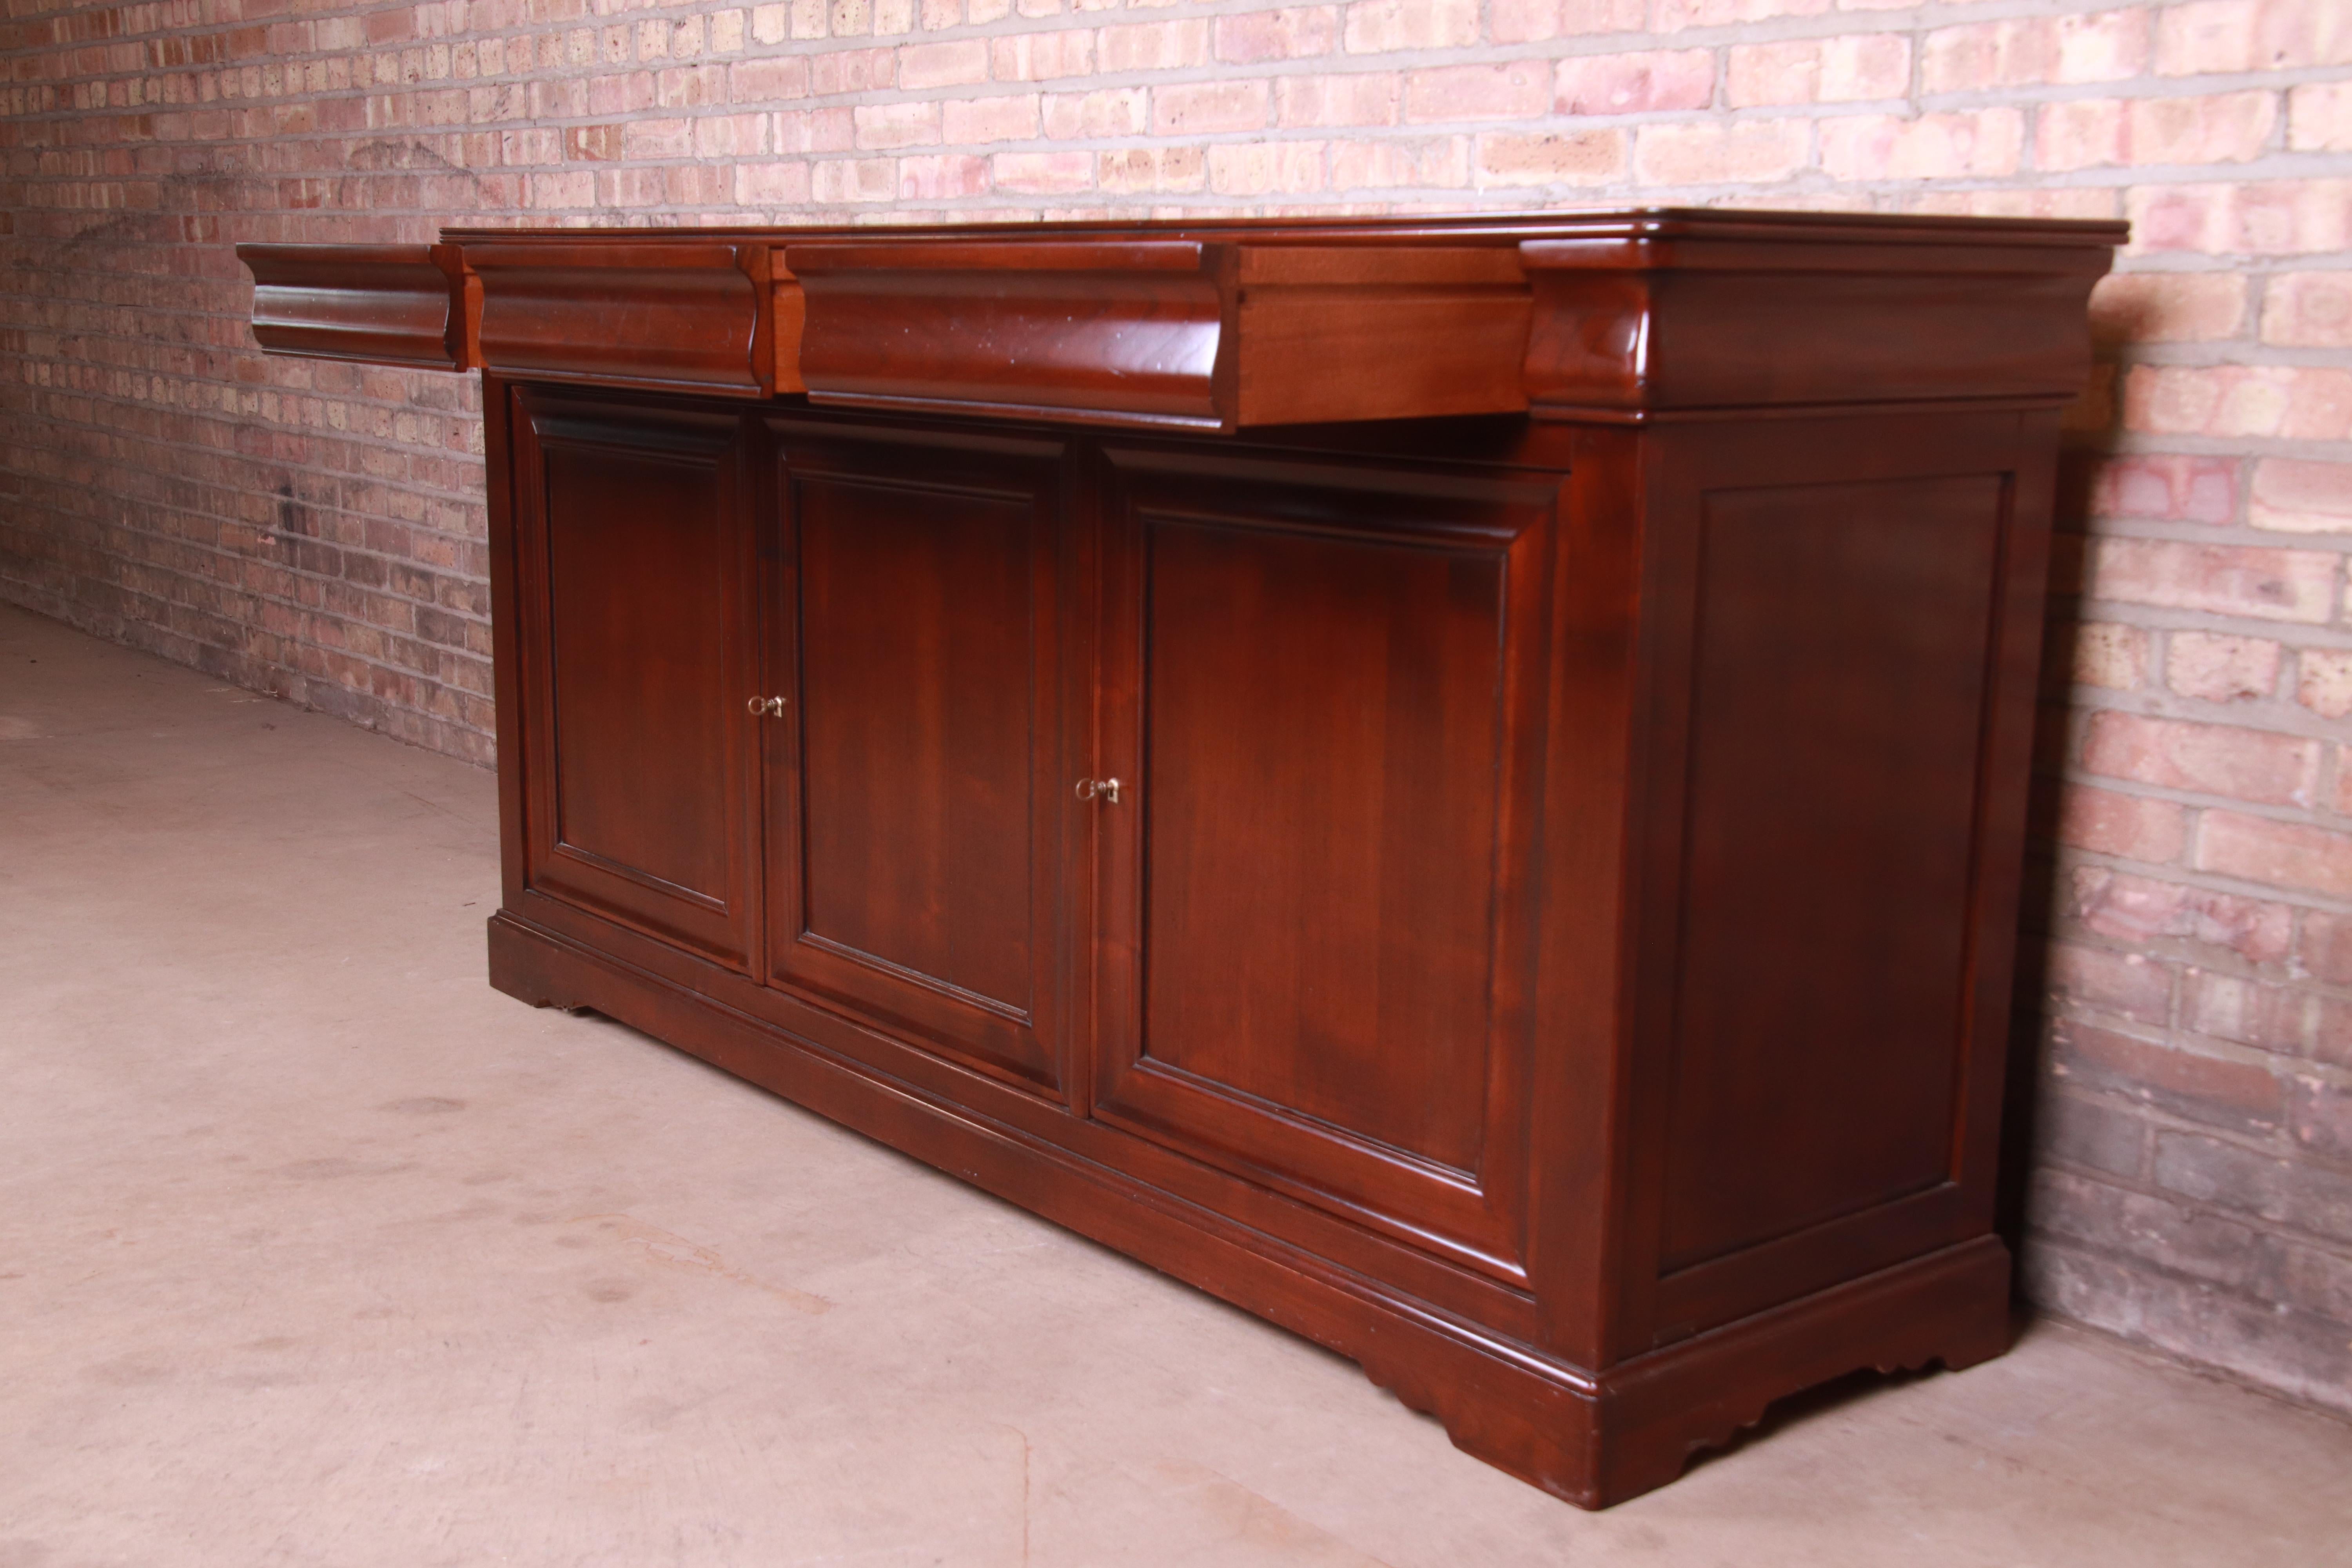 Grange French Provincial Cherry Wood Sideboard Credenza or Bar Cabinet 3